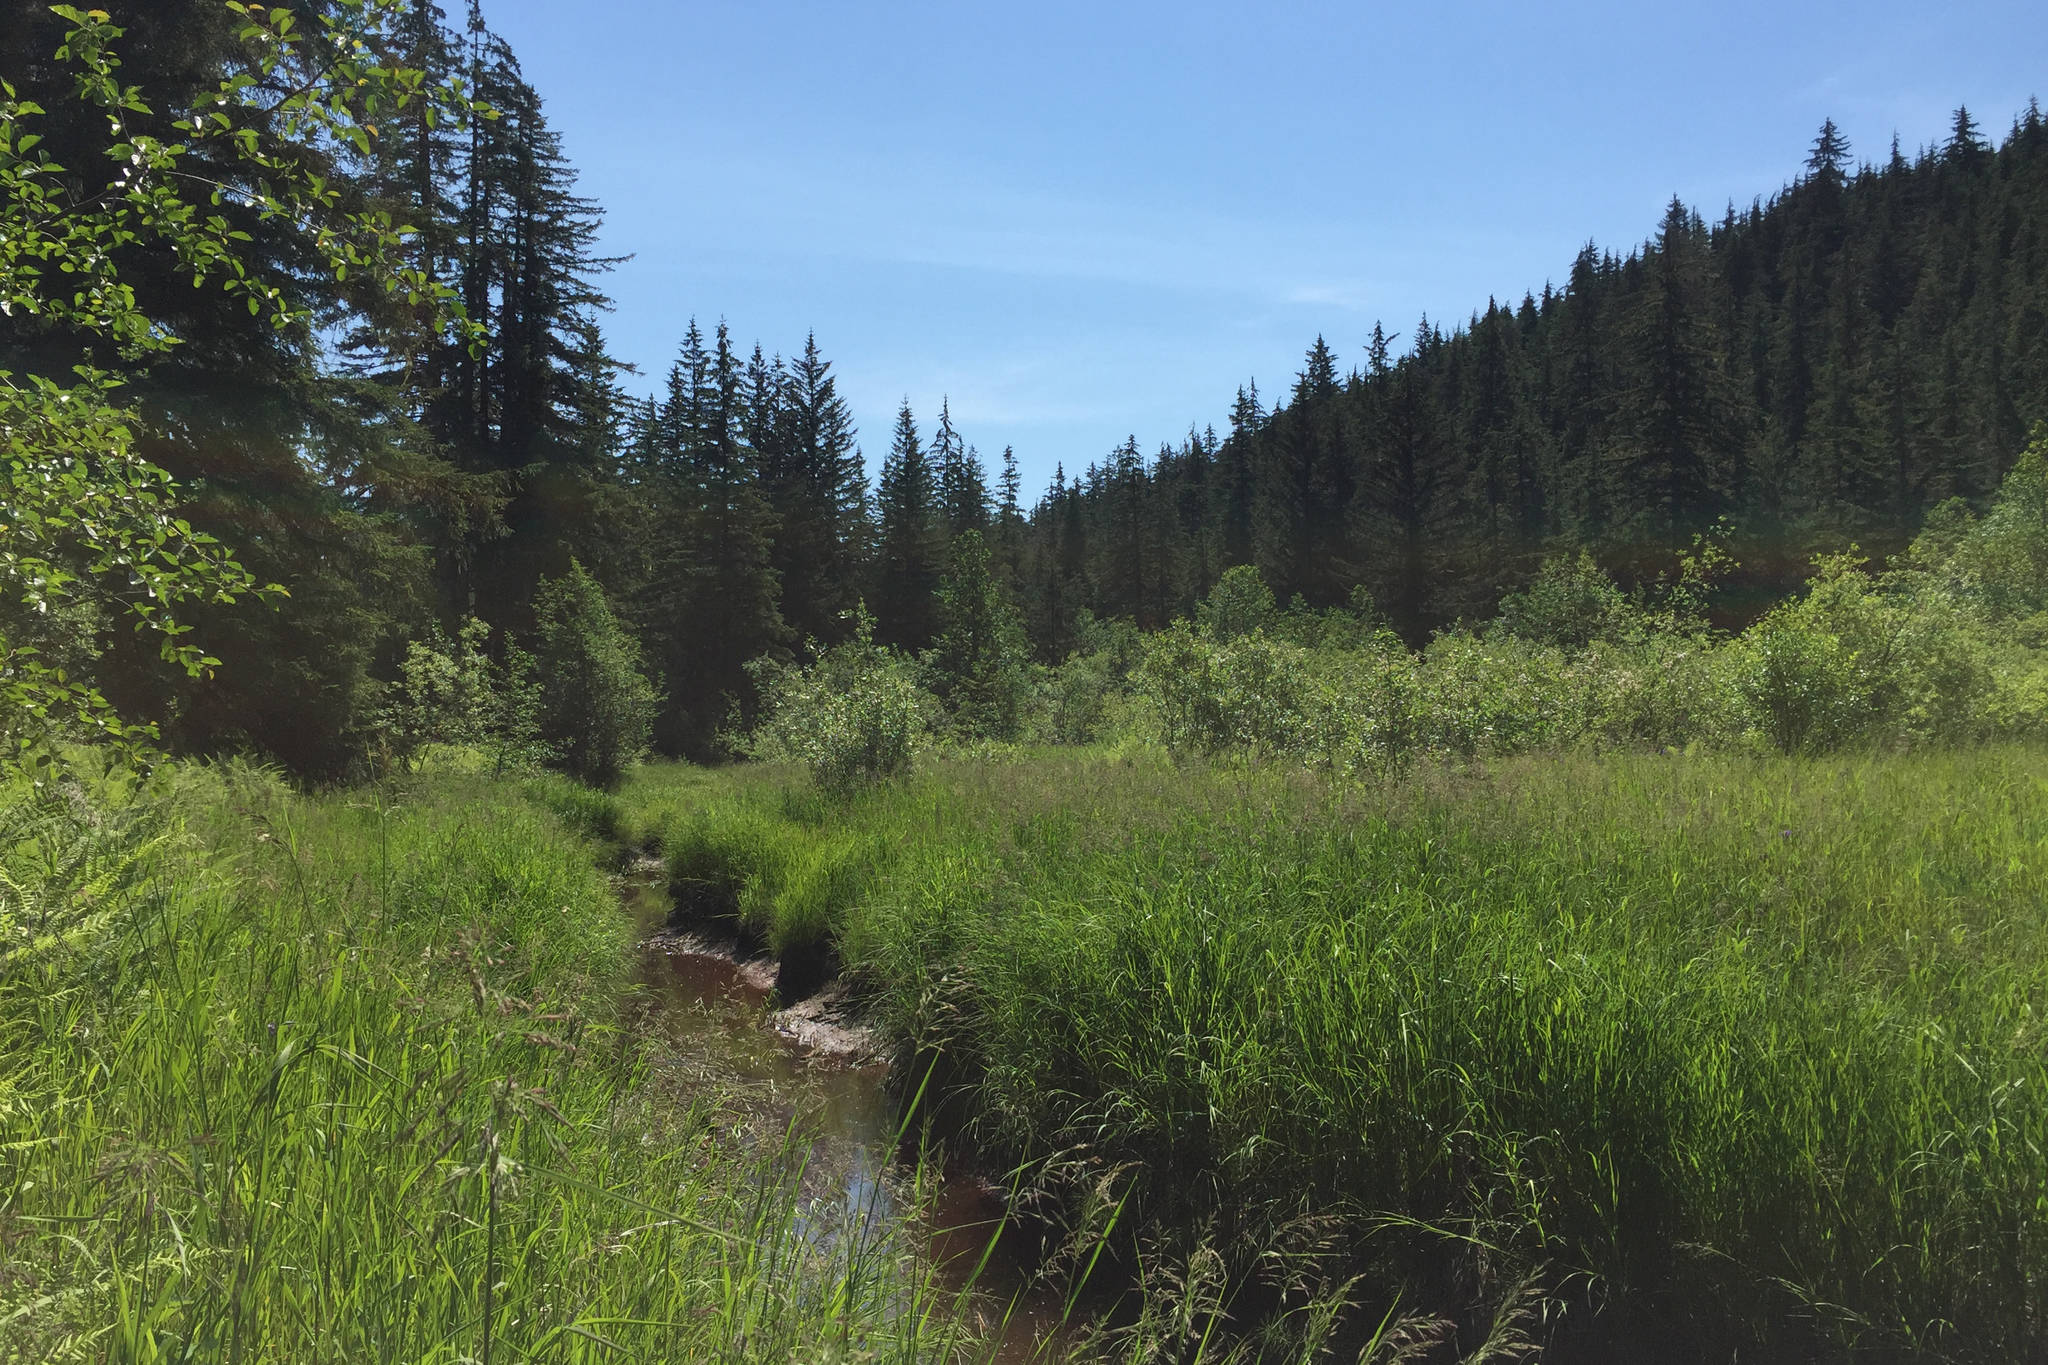 Group buys land near Herbert River, dubbed ‘Very Beary Berry Wetlands’